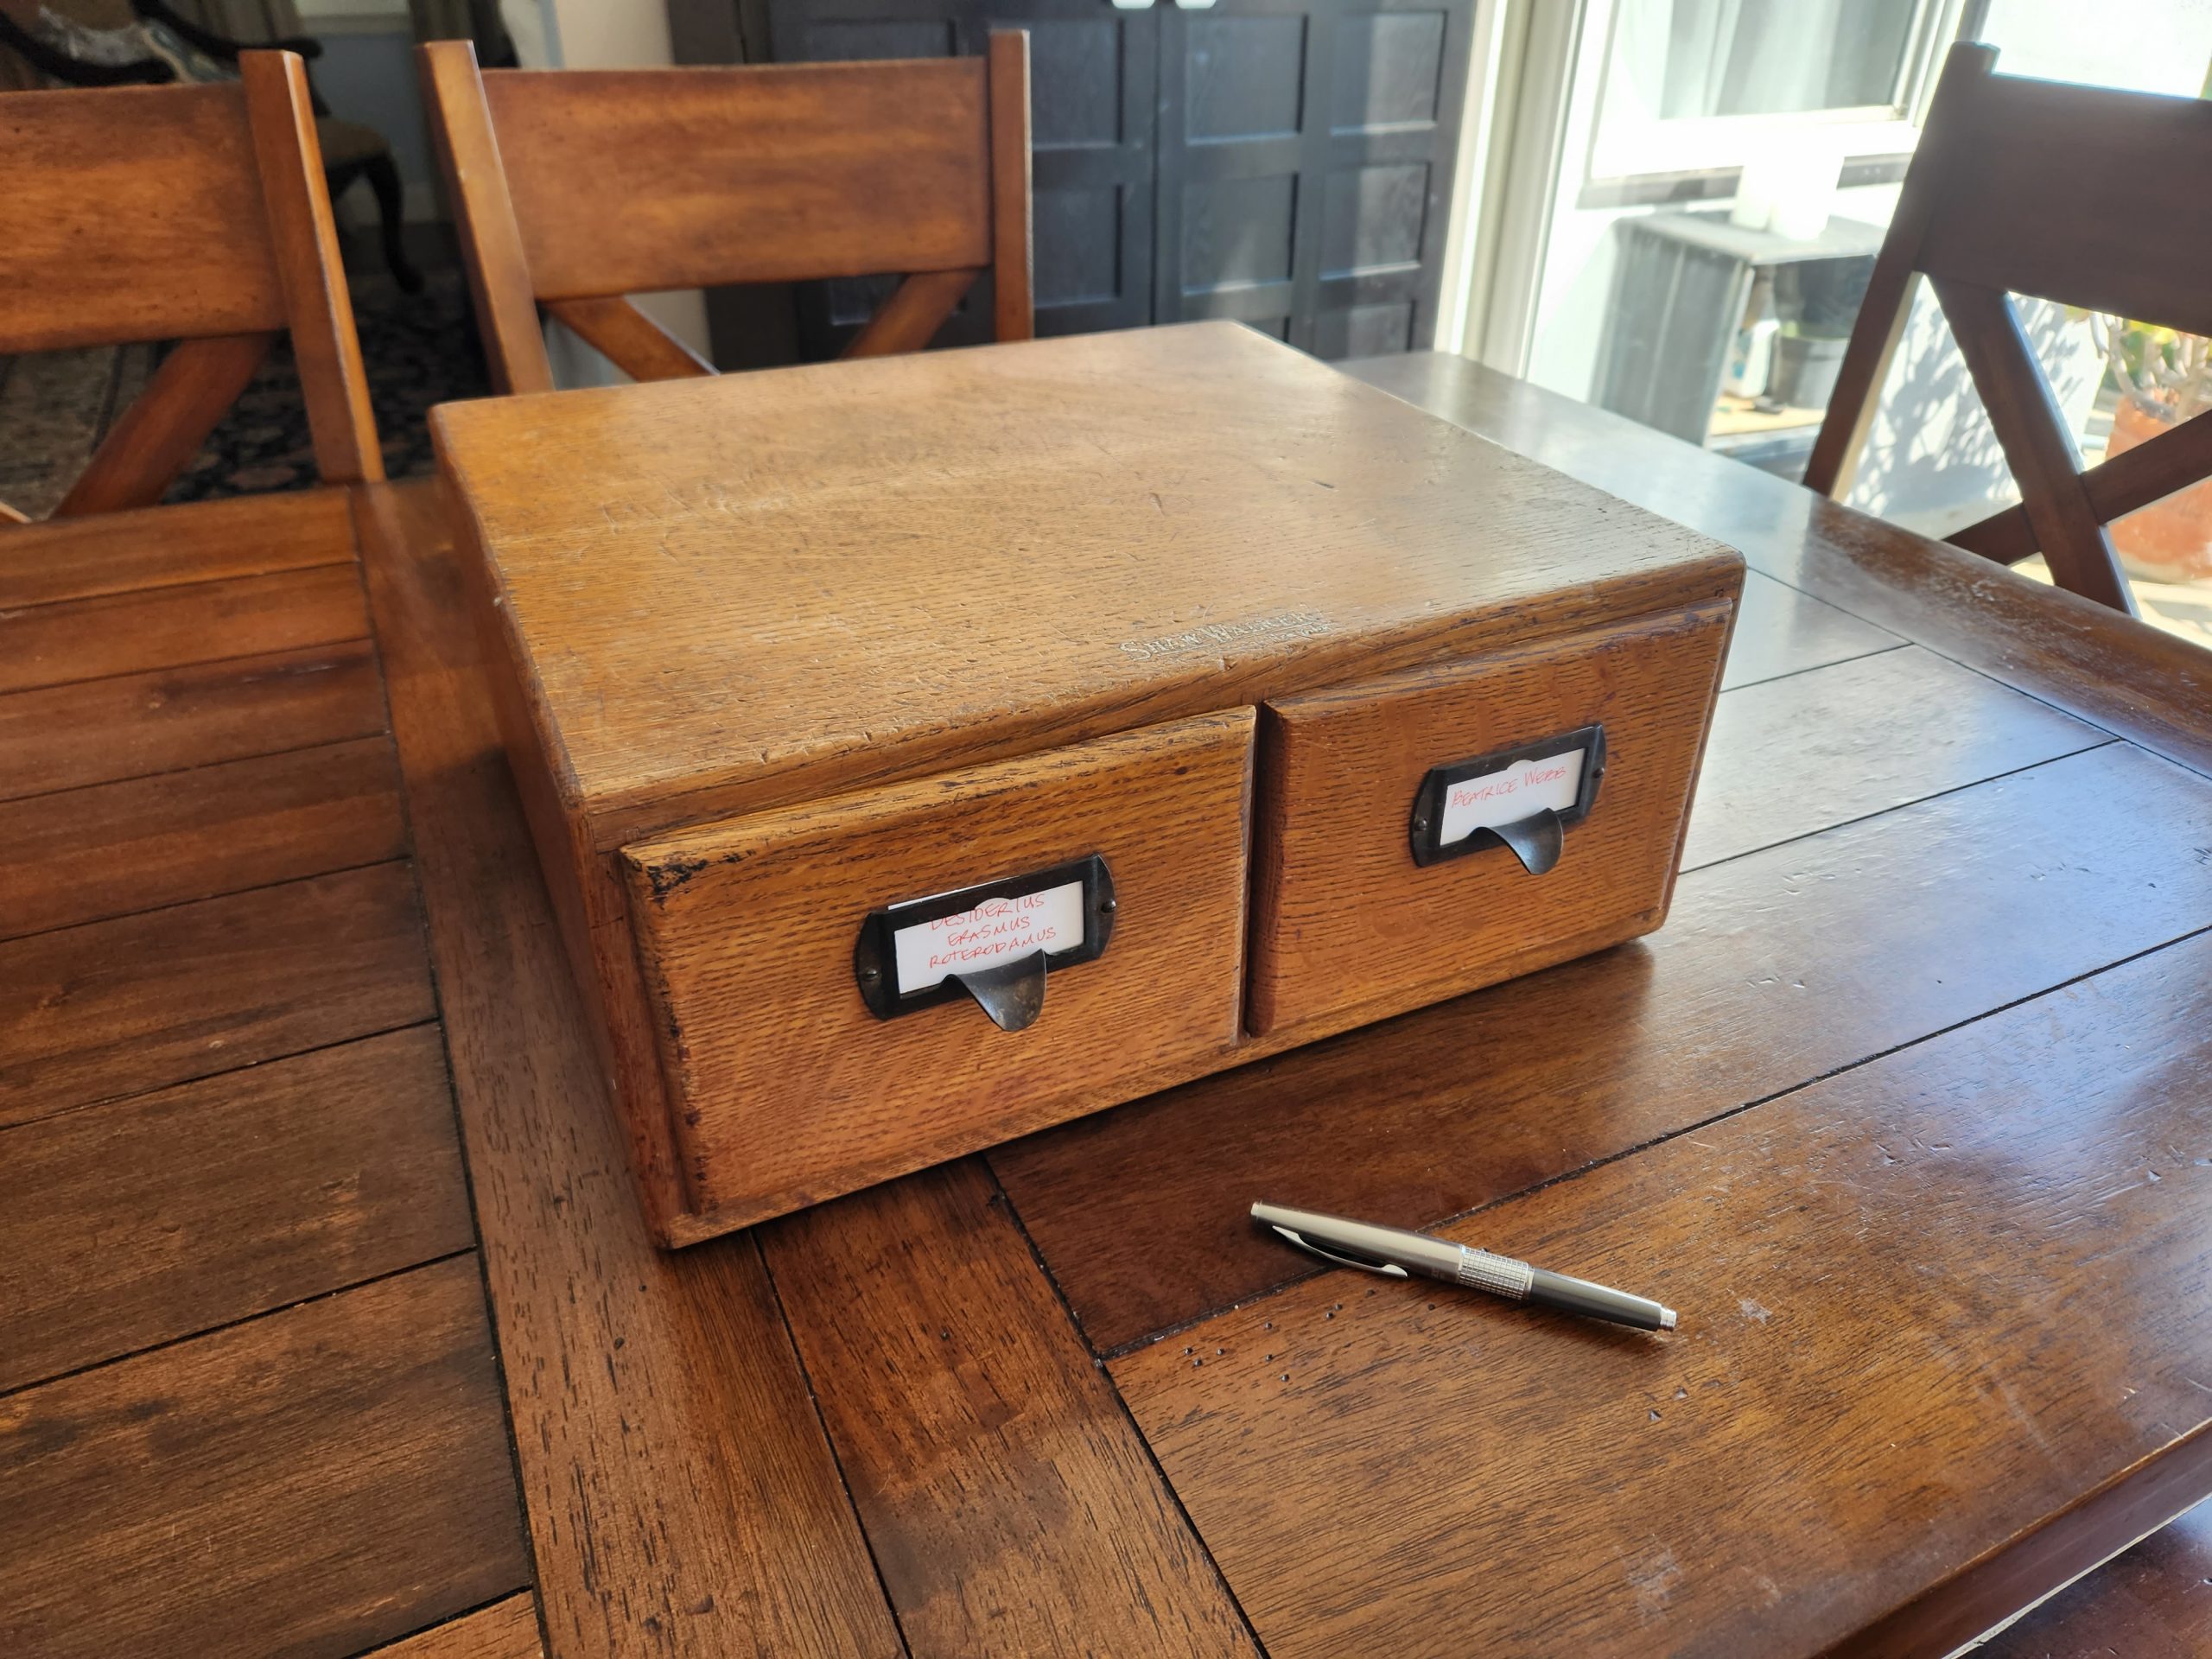 A two drawer wooden card index sitting on a wooden table